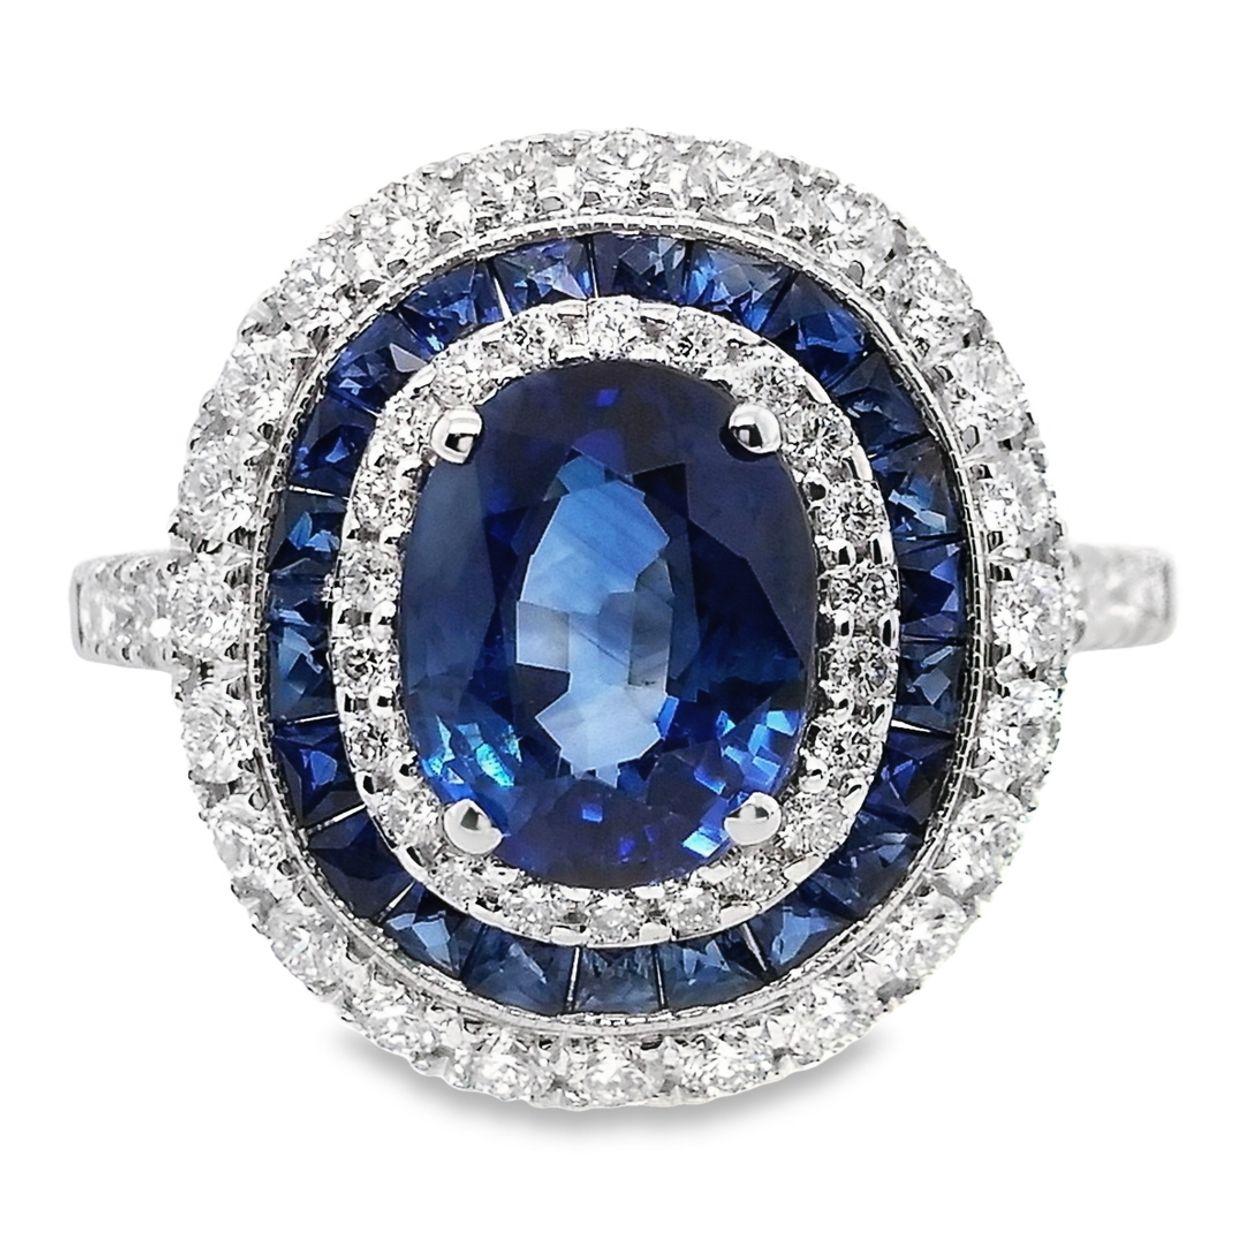 This alluring intense-blue sapphire ring can’t help but evoke feelings of style and glamour.
Natural sapphires accented by white sparkling diamonds is a classic symbol of love and beauty.

This ring is certified by IGI laboratory, report number: